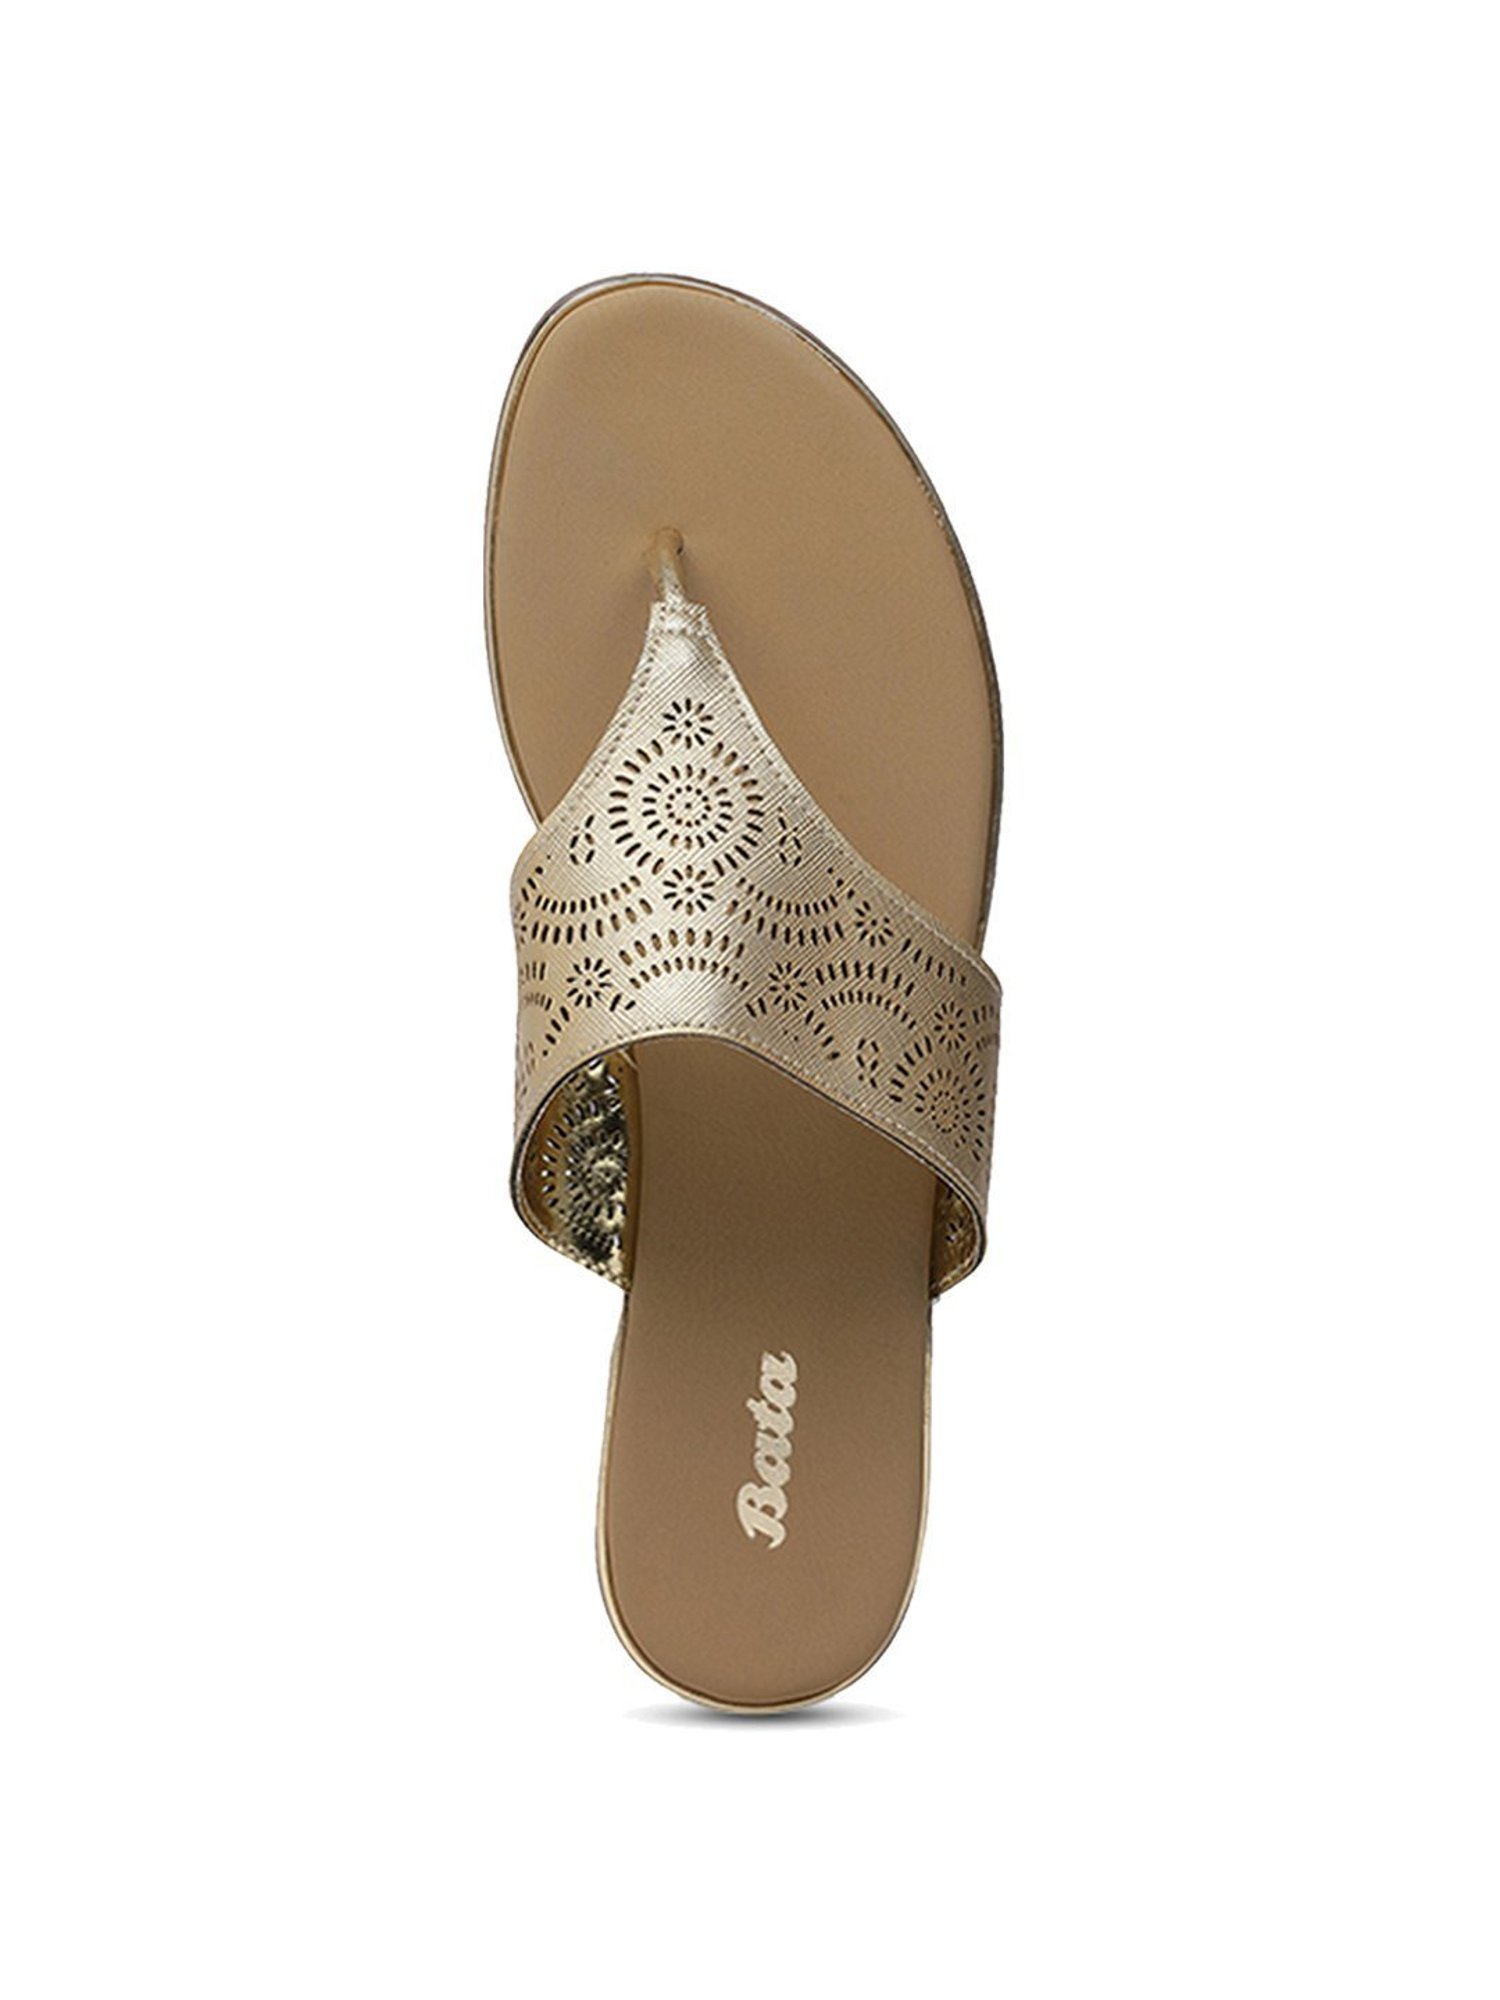 Buy Bata Orchid Red Thong Sandals for Women at Best Price @ Tata CLiQ